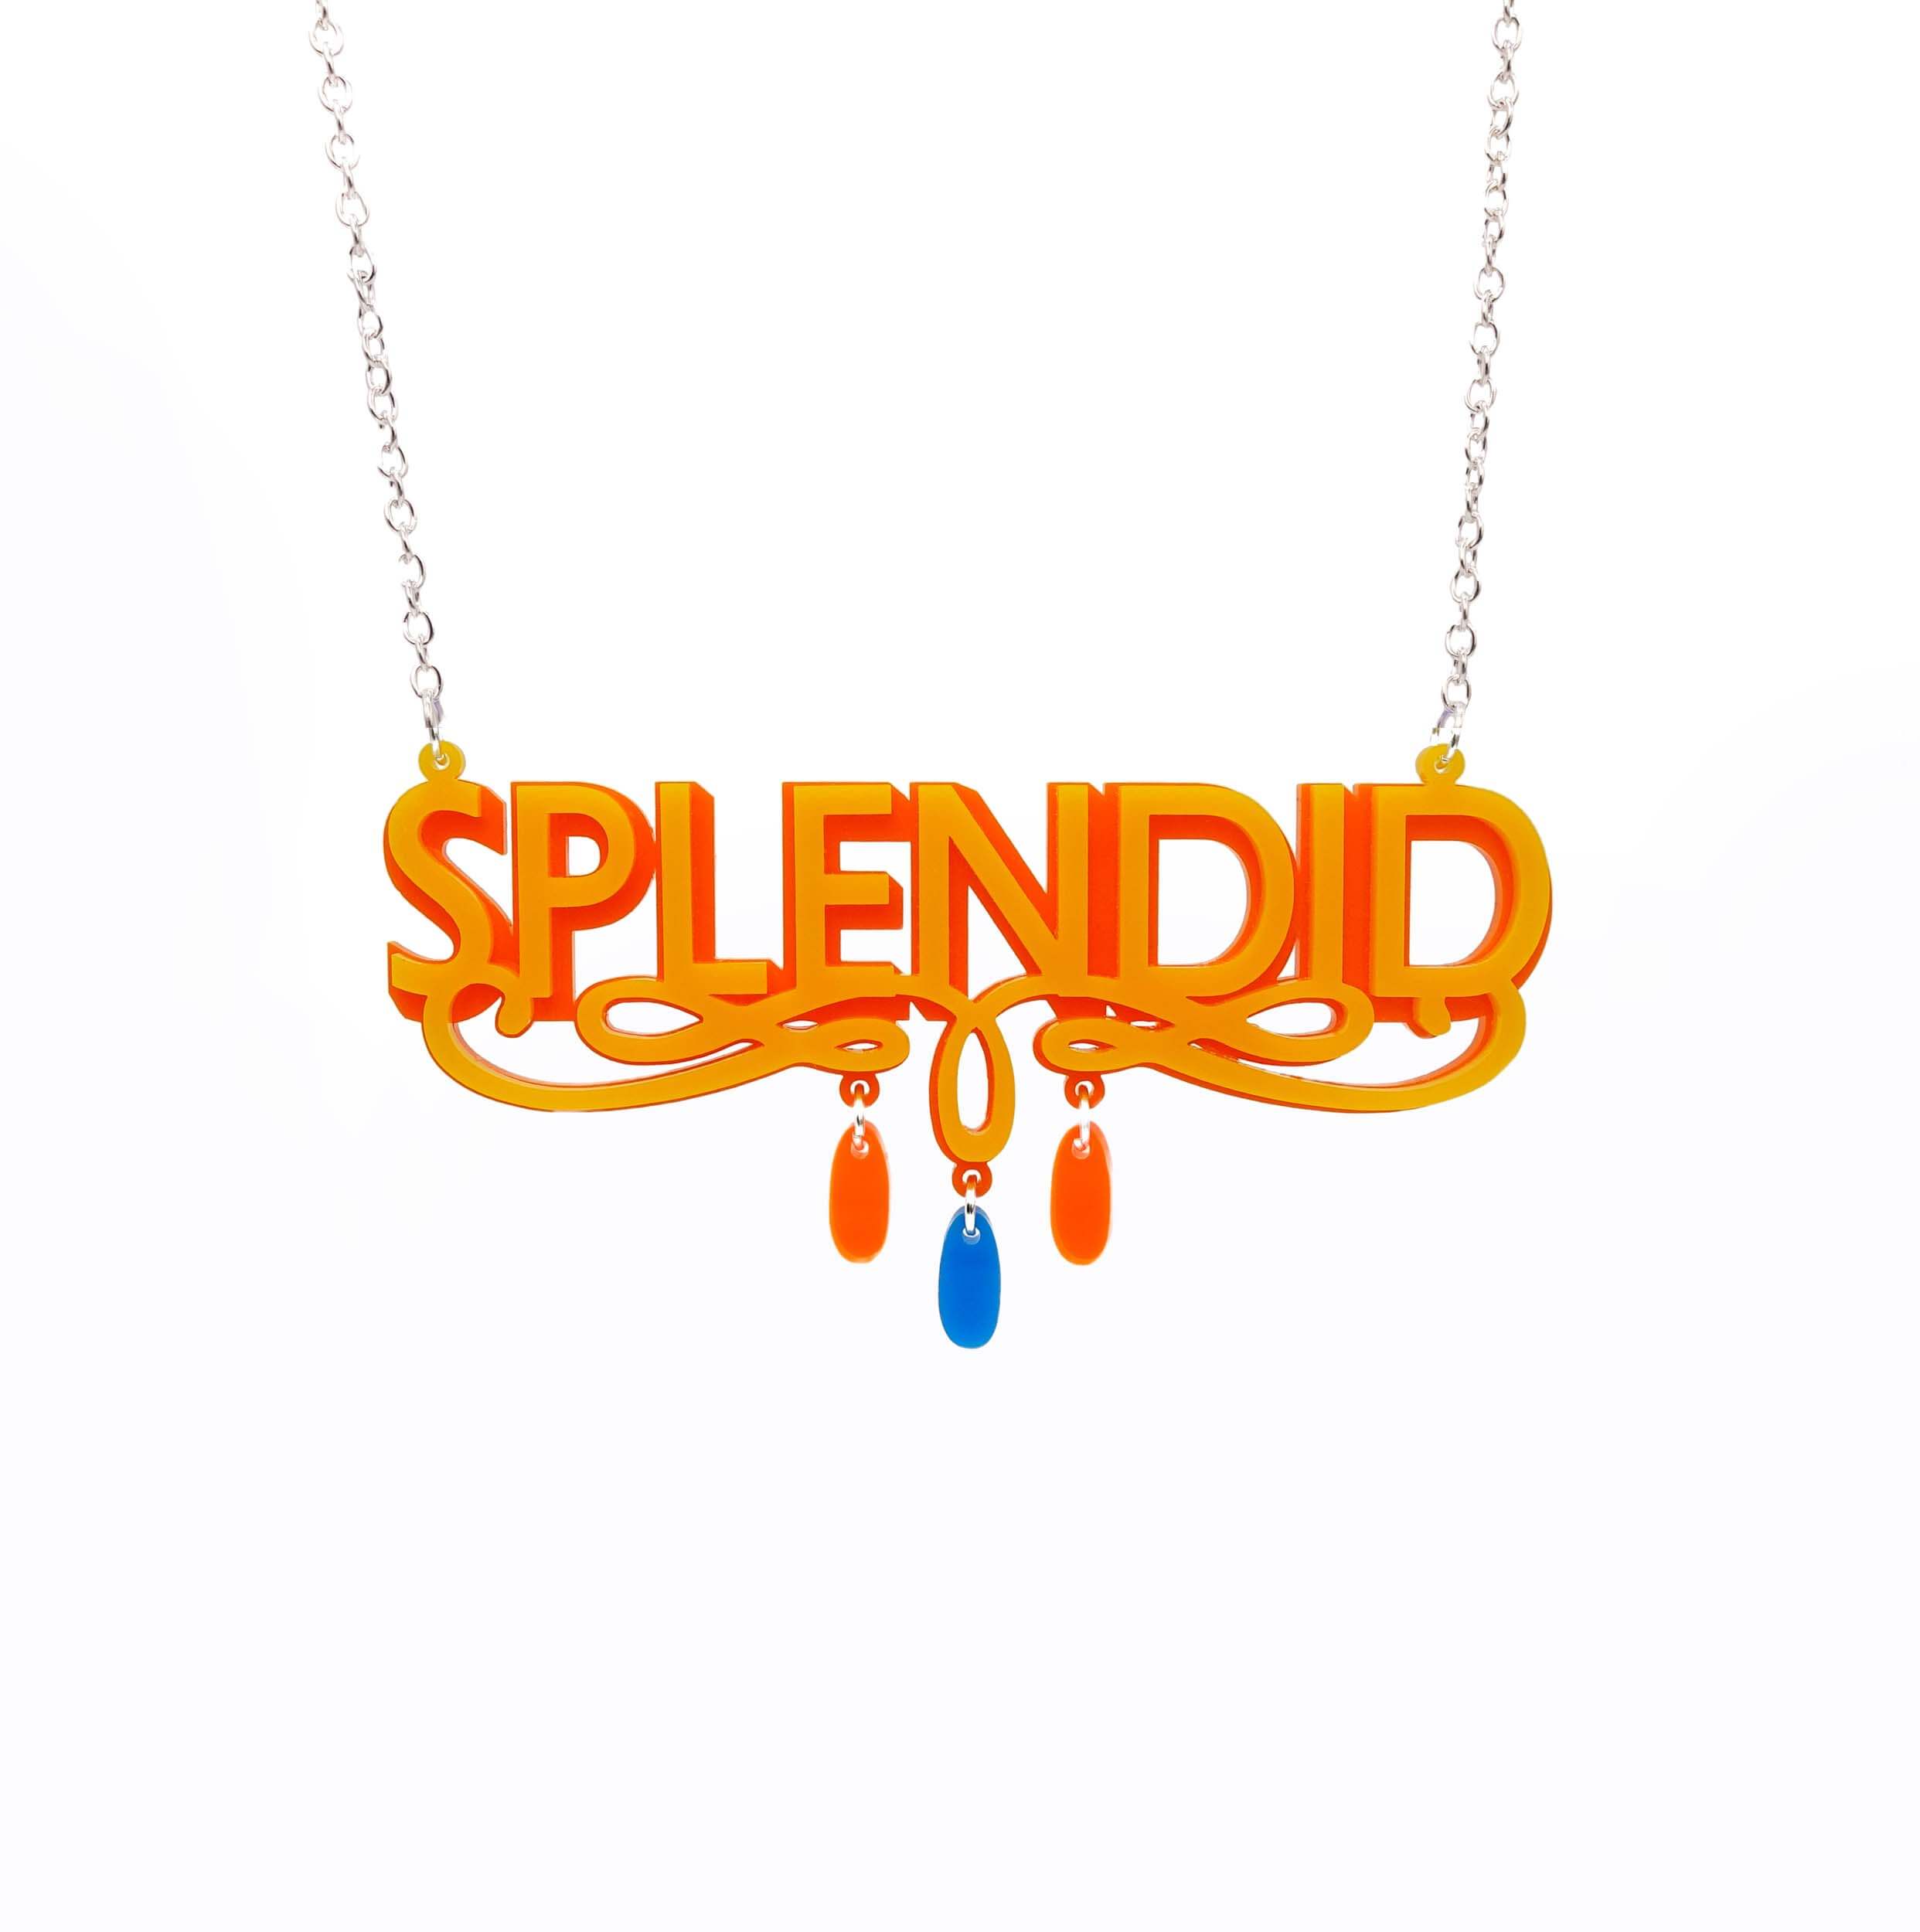 Sunflower yellow and orange Splendid necklace shown hanging against a white background. 